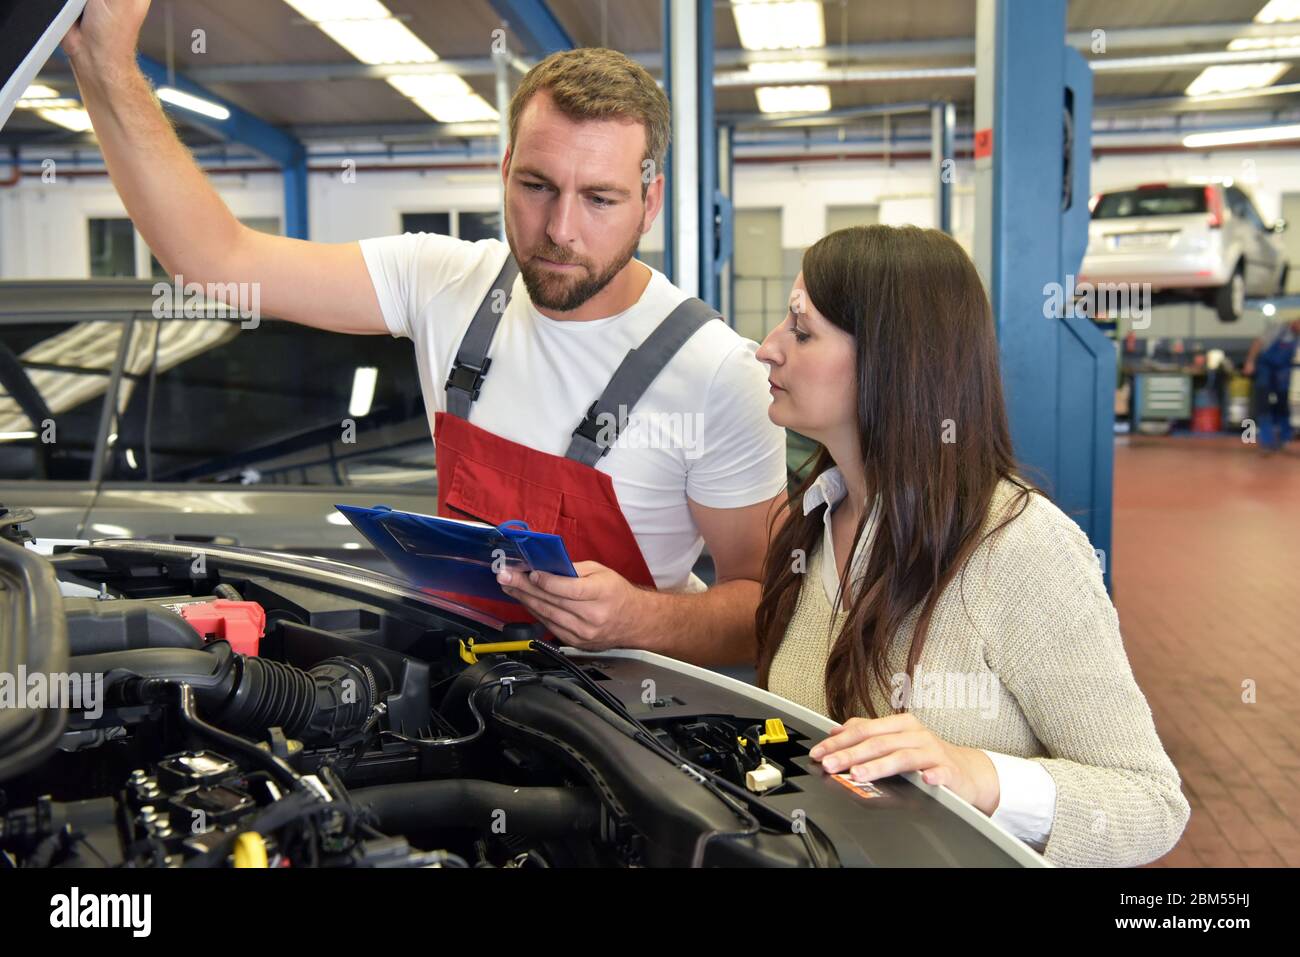 Customer service: car mechanic and customer discuss the repair of a vehicle on site Stock Photo